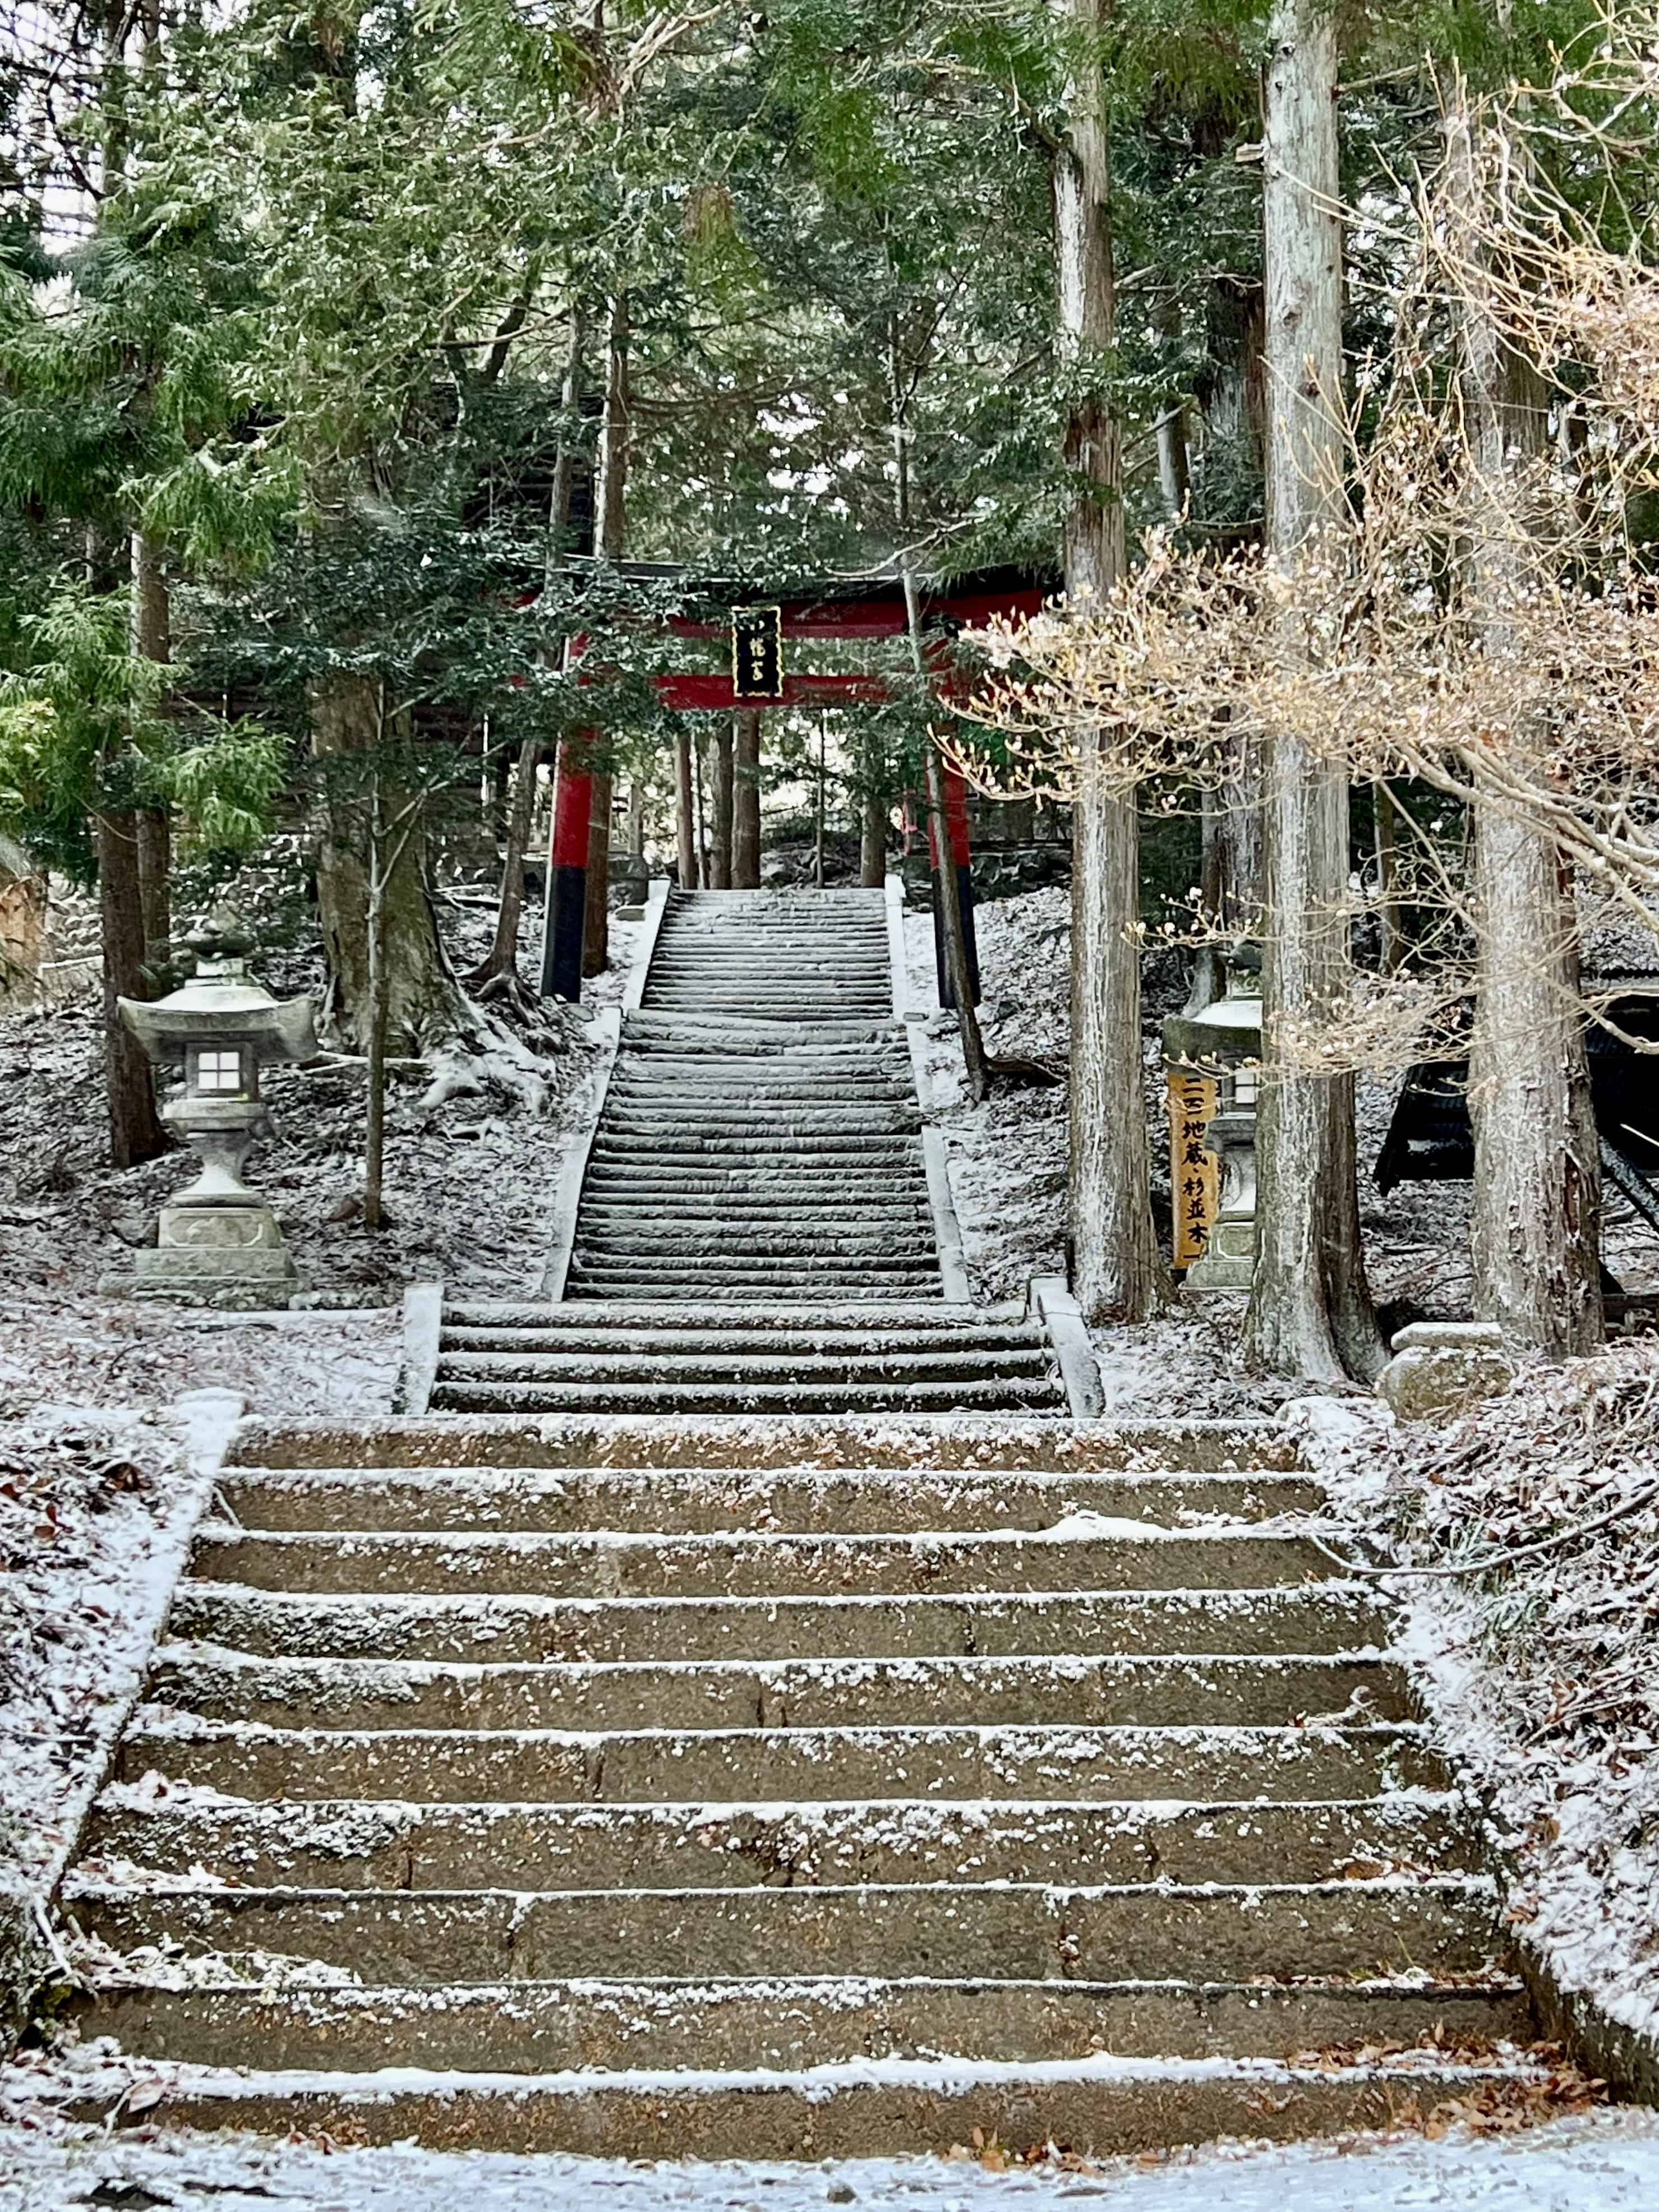 Stone stairs up to a red torii shrine gate in a forest, all covered with a fine layer of snow.